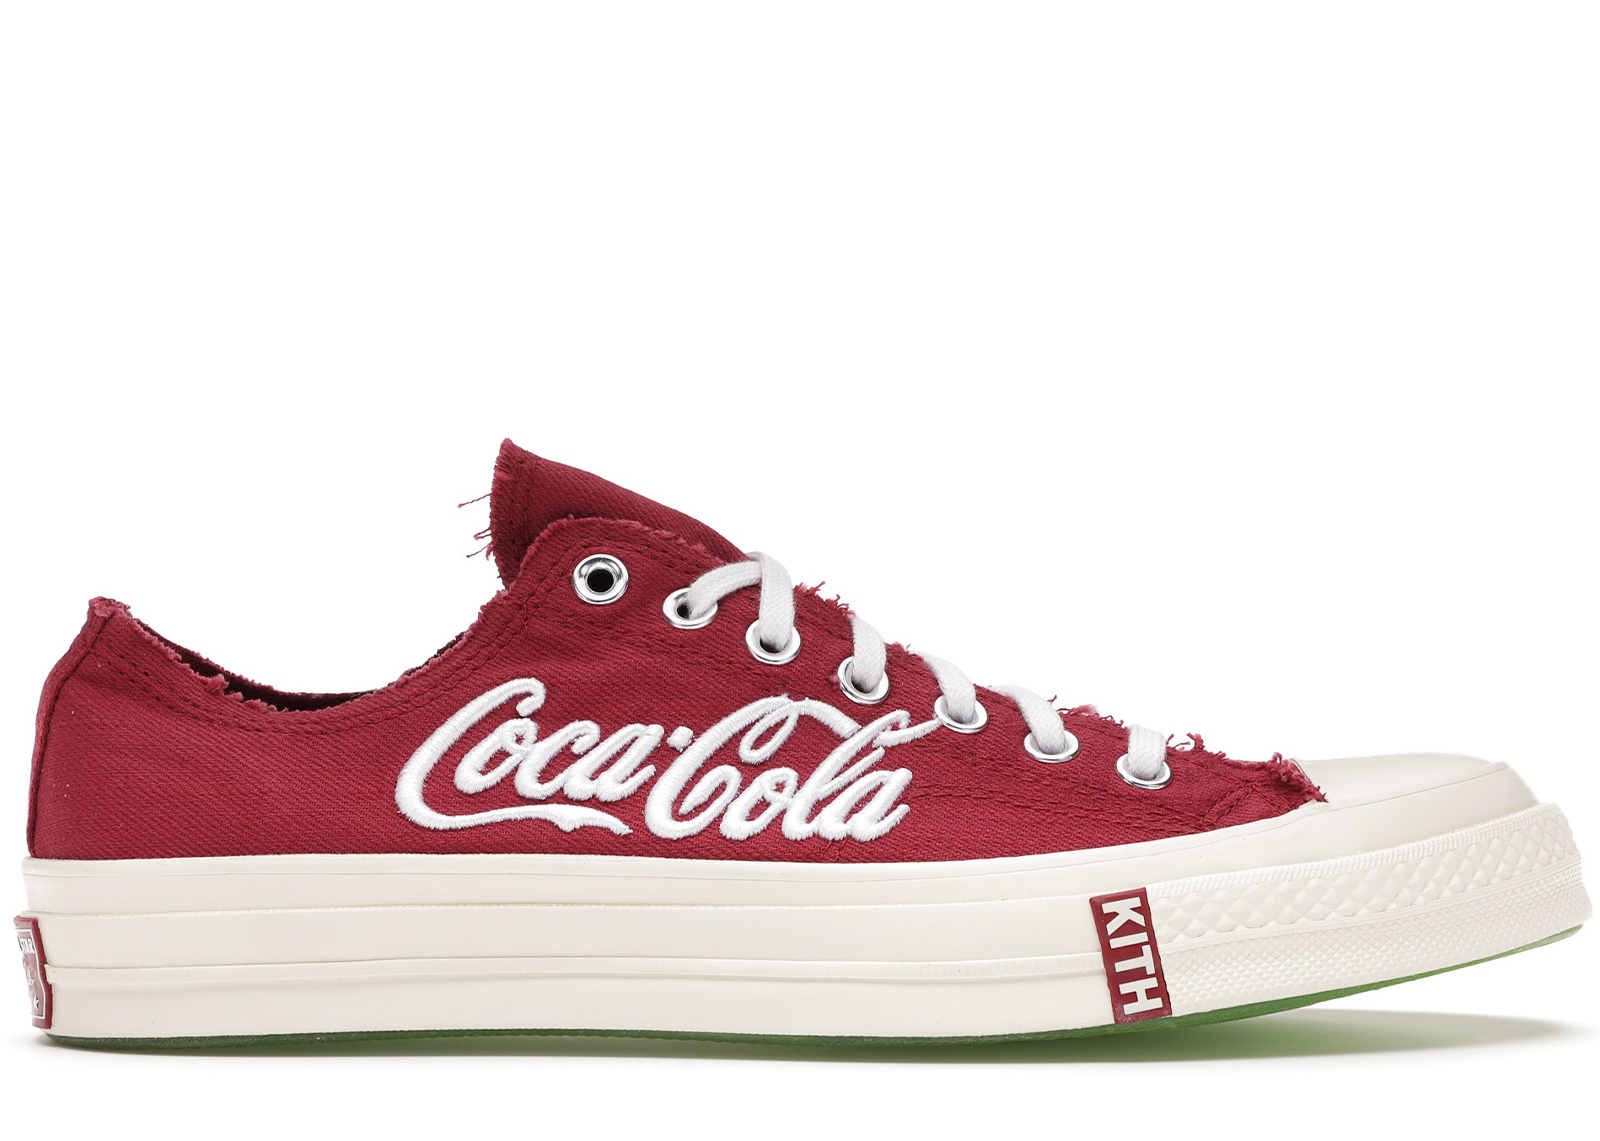 KITH COCACOLA CONVERSE RED